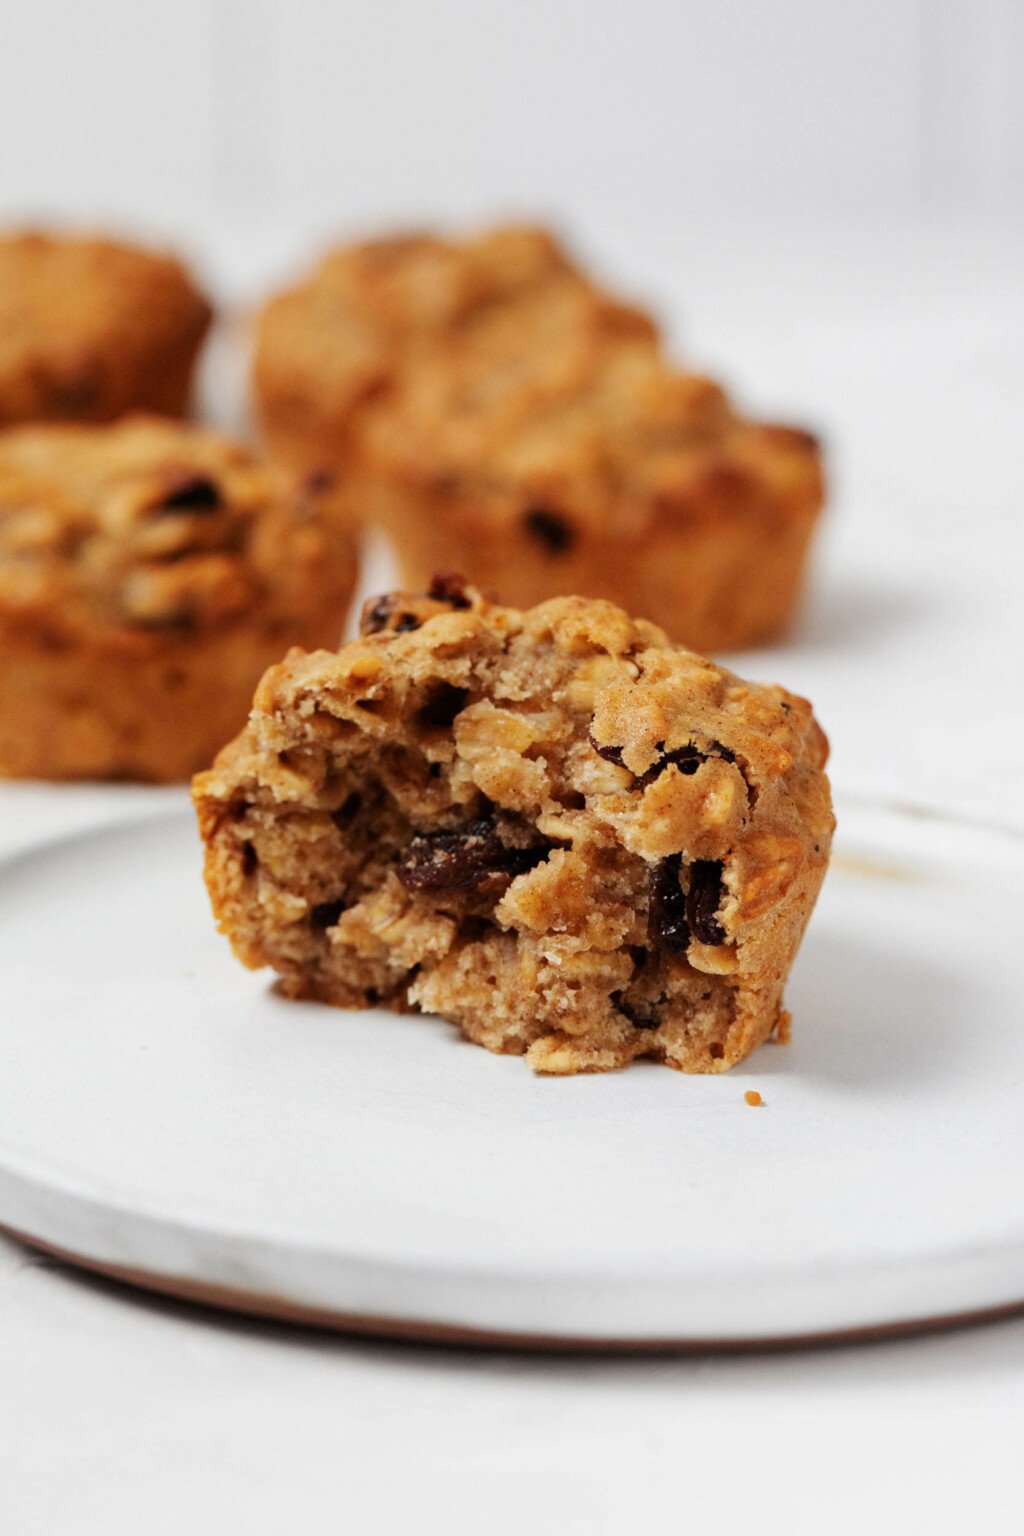 A vegan breakfast treat, made with rolled oats and raisins, is broken in half and resting on a small, white plate.